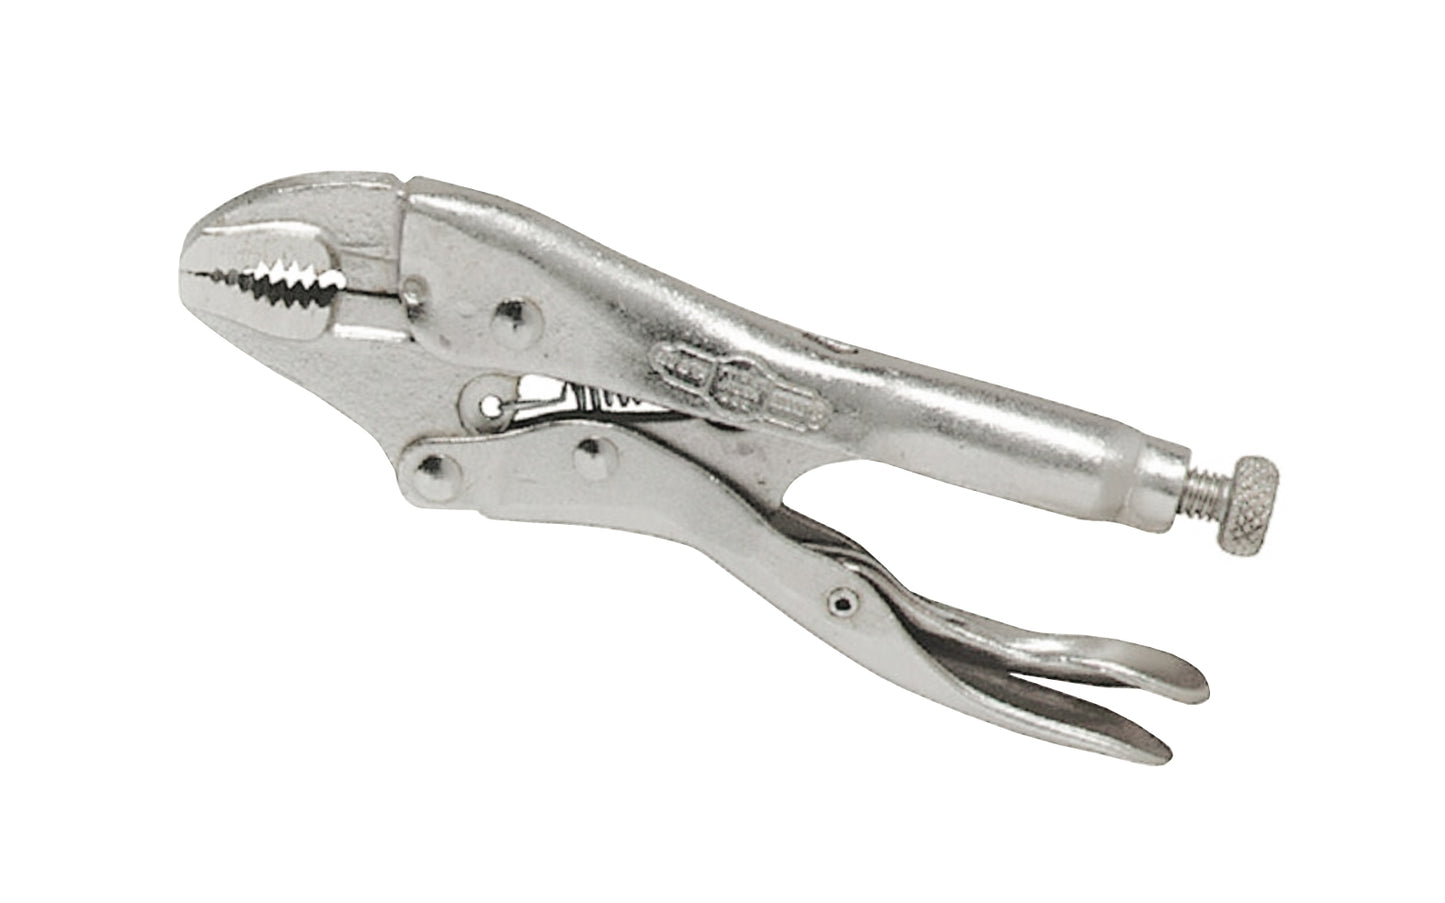 Irwin 4" "The Original" Vise Grip Locking Nose Plier. Model 4WR. Item No. 1002L3. Turn screw to adjust pressure & fit work. Stays adjusted for repetitive use. Constructed of high-grade heat-treated alloy steel for maximum toughness & durability. Hardened teeth are designed to grip from any angle. 15/16" Jaw Capacity.